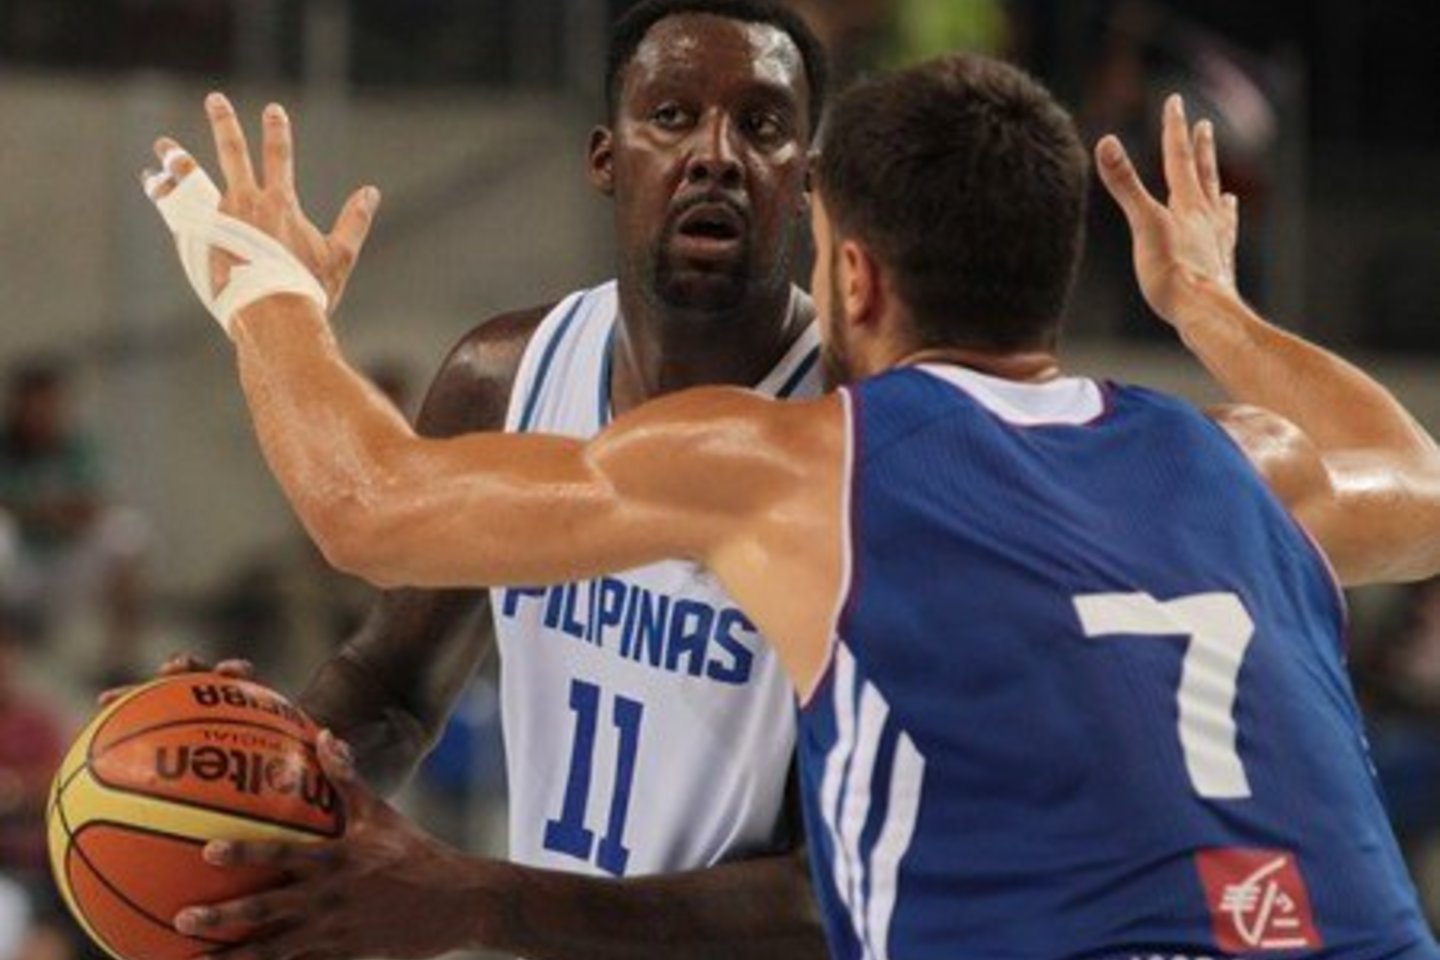  Andray Blatche'as<br> "Scanpix" nuotr.